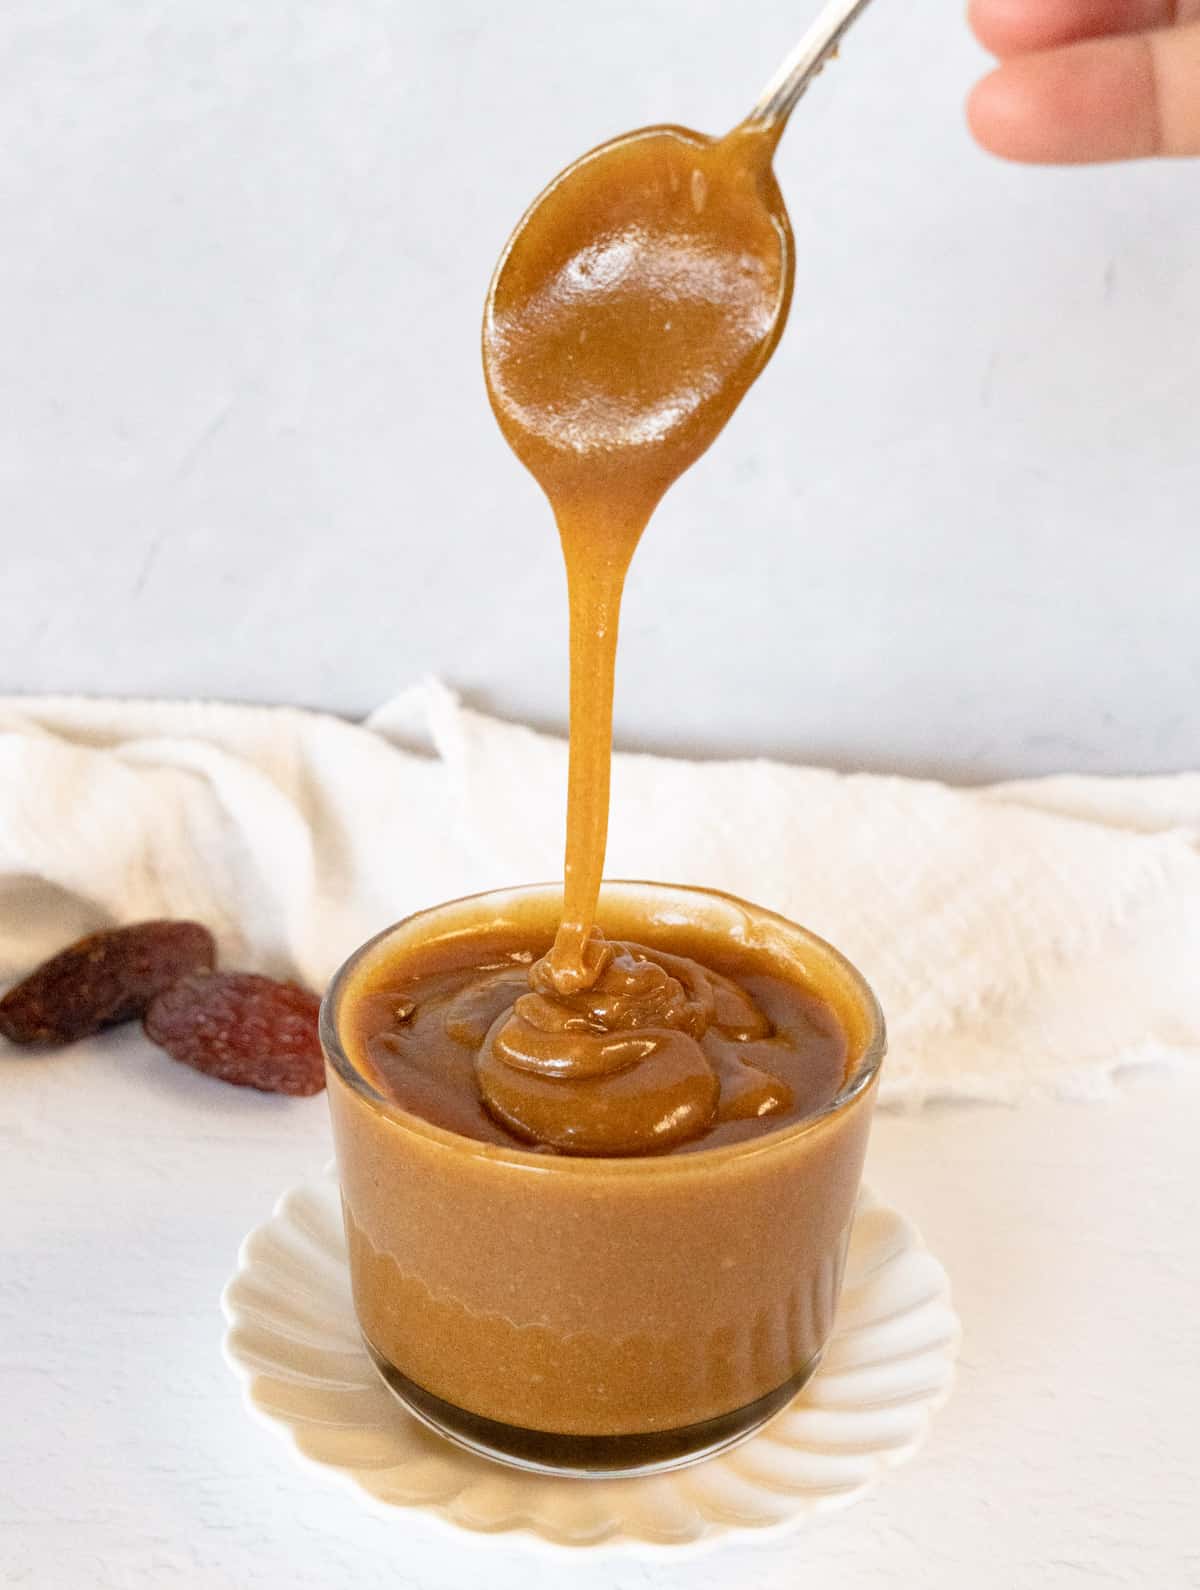 a small glass bowl filled with light brown caramel sauce with spoon dripping it in the bowl